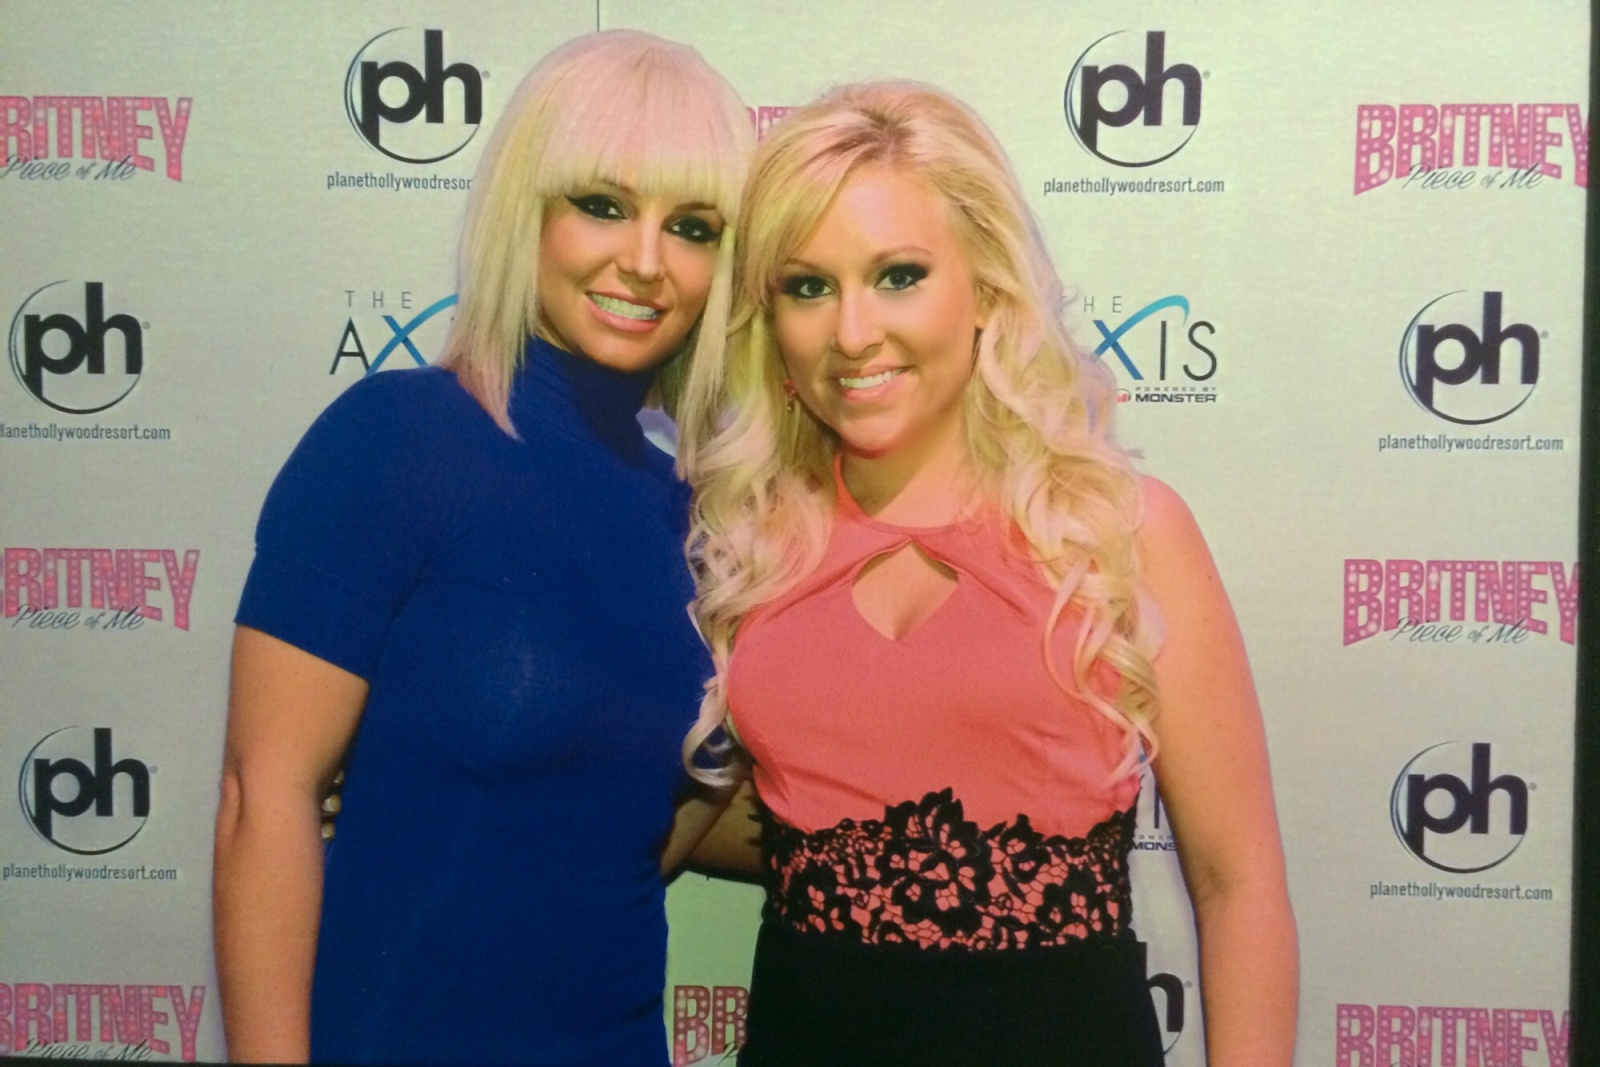 Get back britney. Meet and greet Britney Spears.